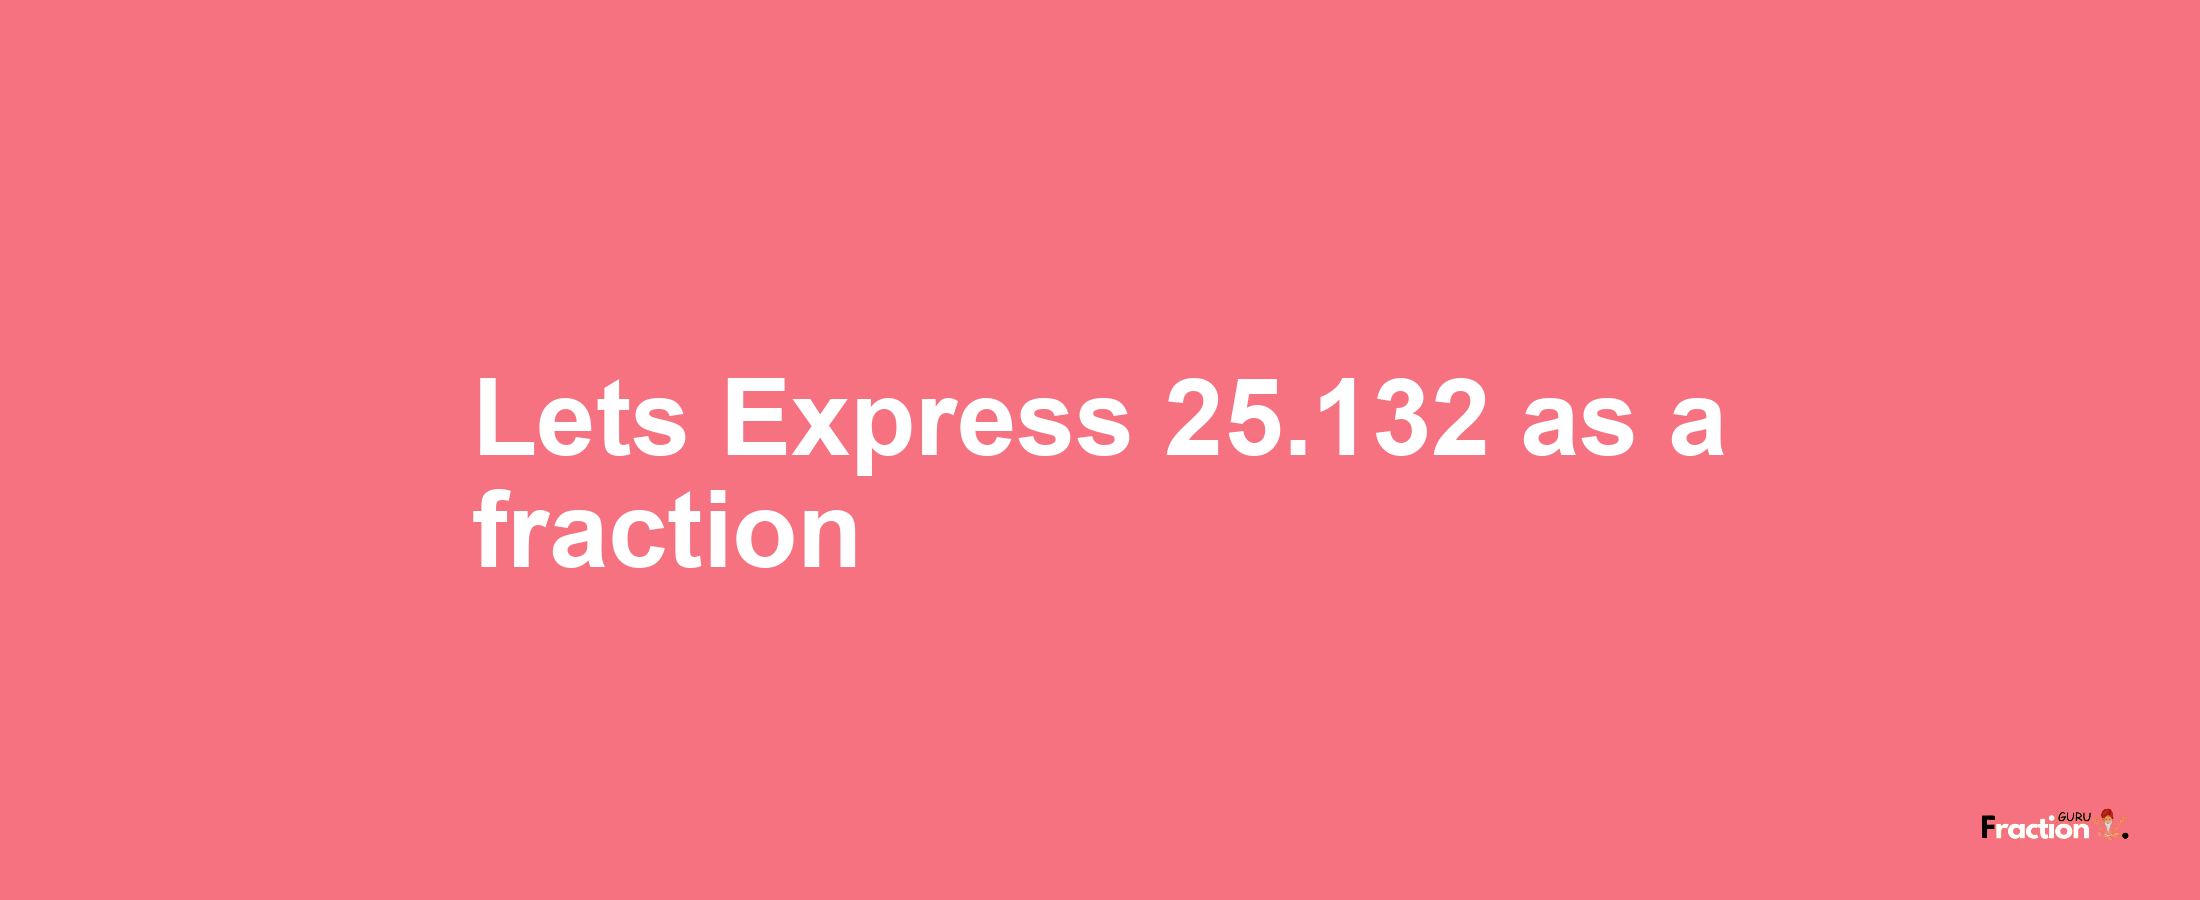 Lets Express 25.132 as afraction